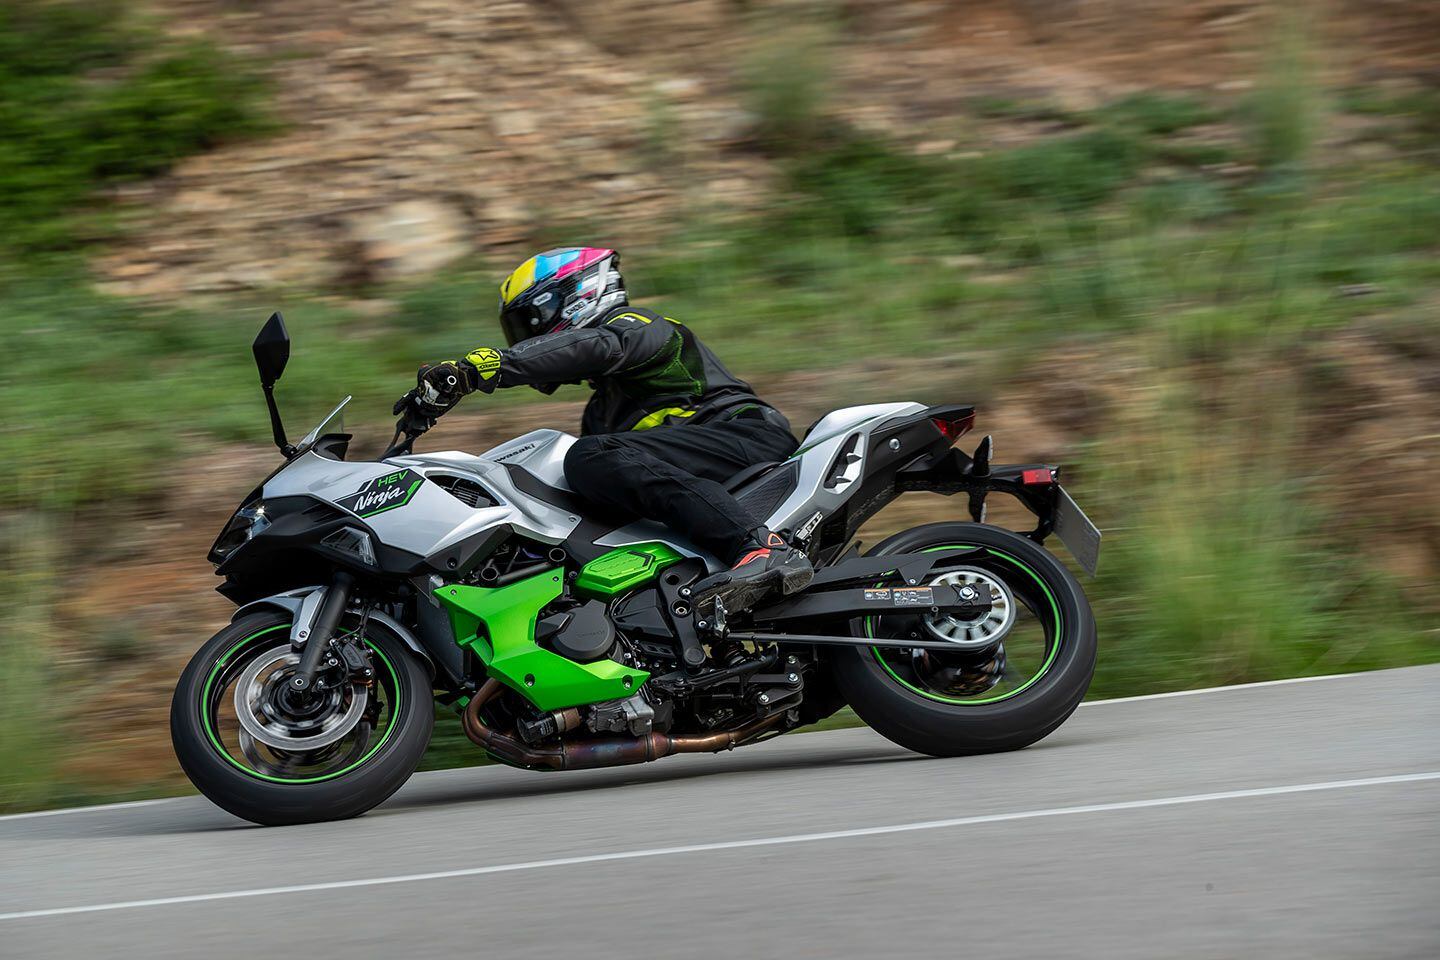 The Ninja 7 Hybrid’s long wheelbase and added weight mean the bike is not as nimble as a Ninja 400, but it still hustles down a tight mountain road.